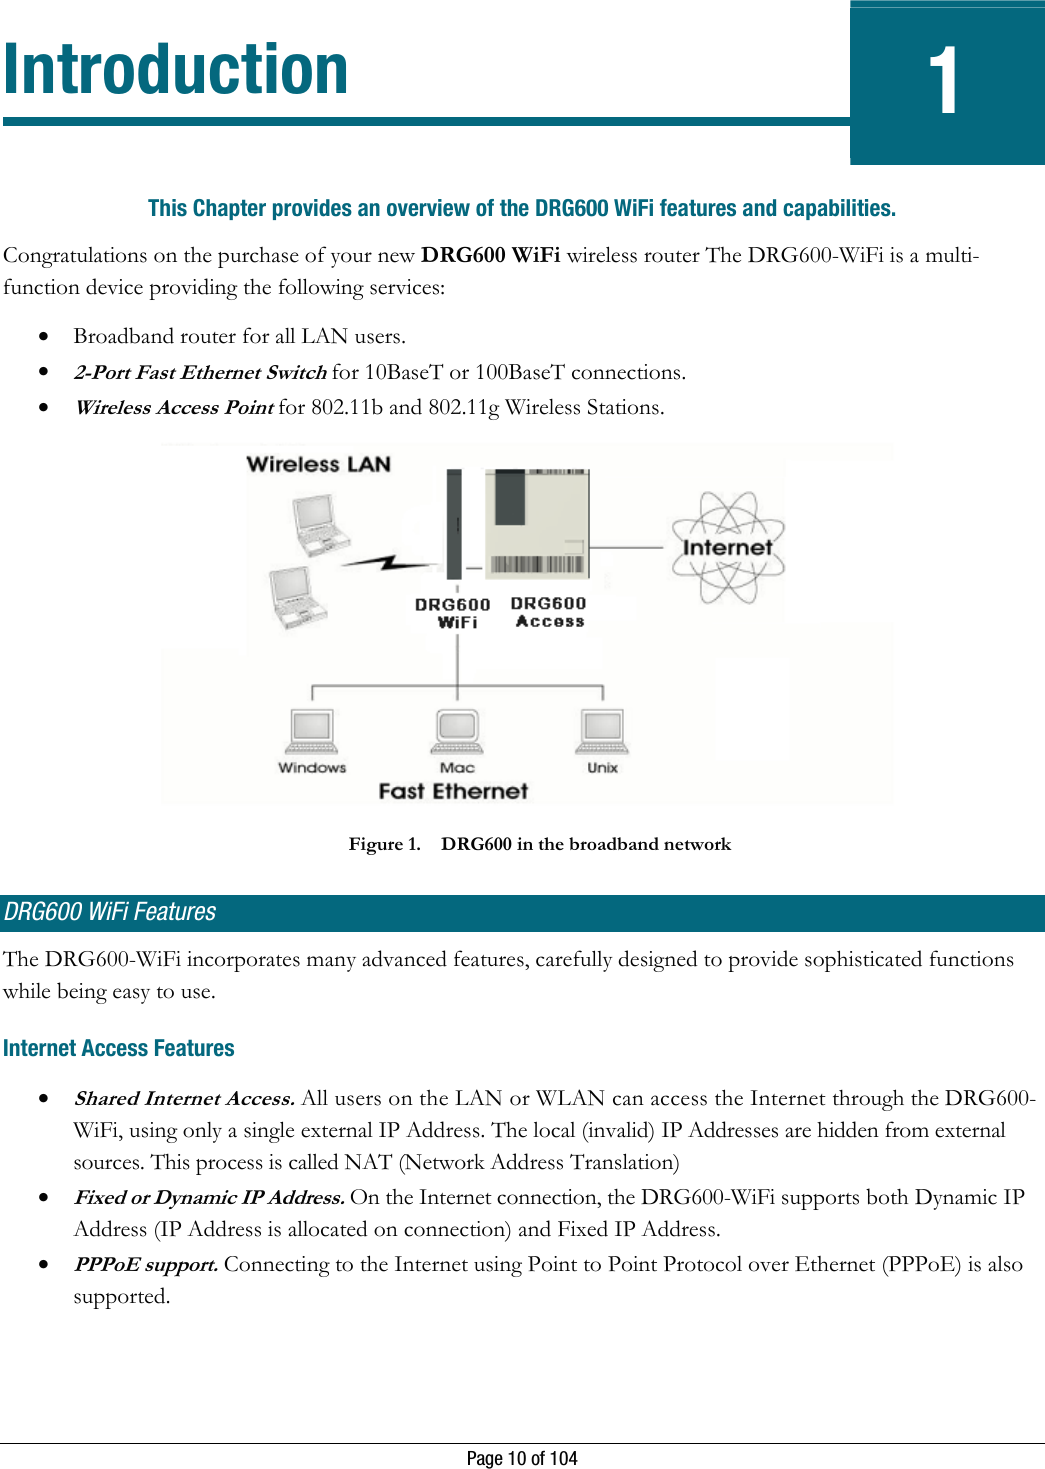   Page 10 of 104 Introduction 1 This Chapter provides an overview of the DRG600 WiFi features and capabilities. Congratulations on the purchase of your new DRG600 WiFi wireless router The DRG600-WiFi is a multi-function device providing the following services: • Broadband router for all LAN users. • 2-Port Fast Ethernet Switch for 10BaseT or 100BaseT connections.  • Wireless Access Point for 802.11b and 802.11g Wireless Stations.  Figure 1. DRG600 in the broadband network DRG600 WiFi Features The DRG600-WiFi incorporates many advanced features, carefully designed to provide sophisticated functions while being easy to use. Internet Access Features • Shared Internet Access. All users on the LAN or WLAN can access the Internet through the DRG600-WiFi, using only a single external IP Address. The local (invalid) IP Addresses are hidden from external sources. This process is called NAT (Network Address Translation) • Fixed or Dynamic IP Address. On the Internet connection, the DRG600-WiFi supports both Dynamic IP Address (IP Address is allocated on connection) and Fixed IP Address.  • PPPoE support. Connecting to the Internet using Point to Point Protocol over Ethernet (PPPoE) is also supported. 